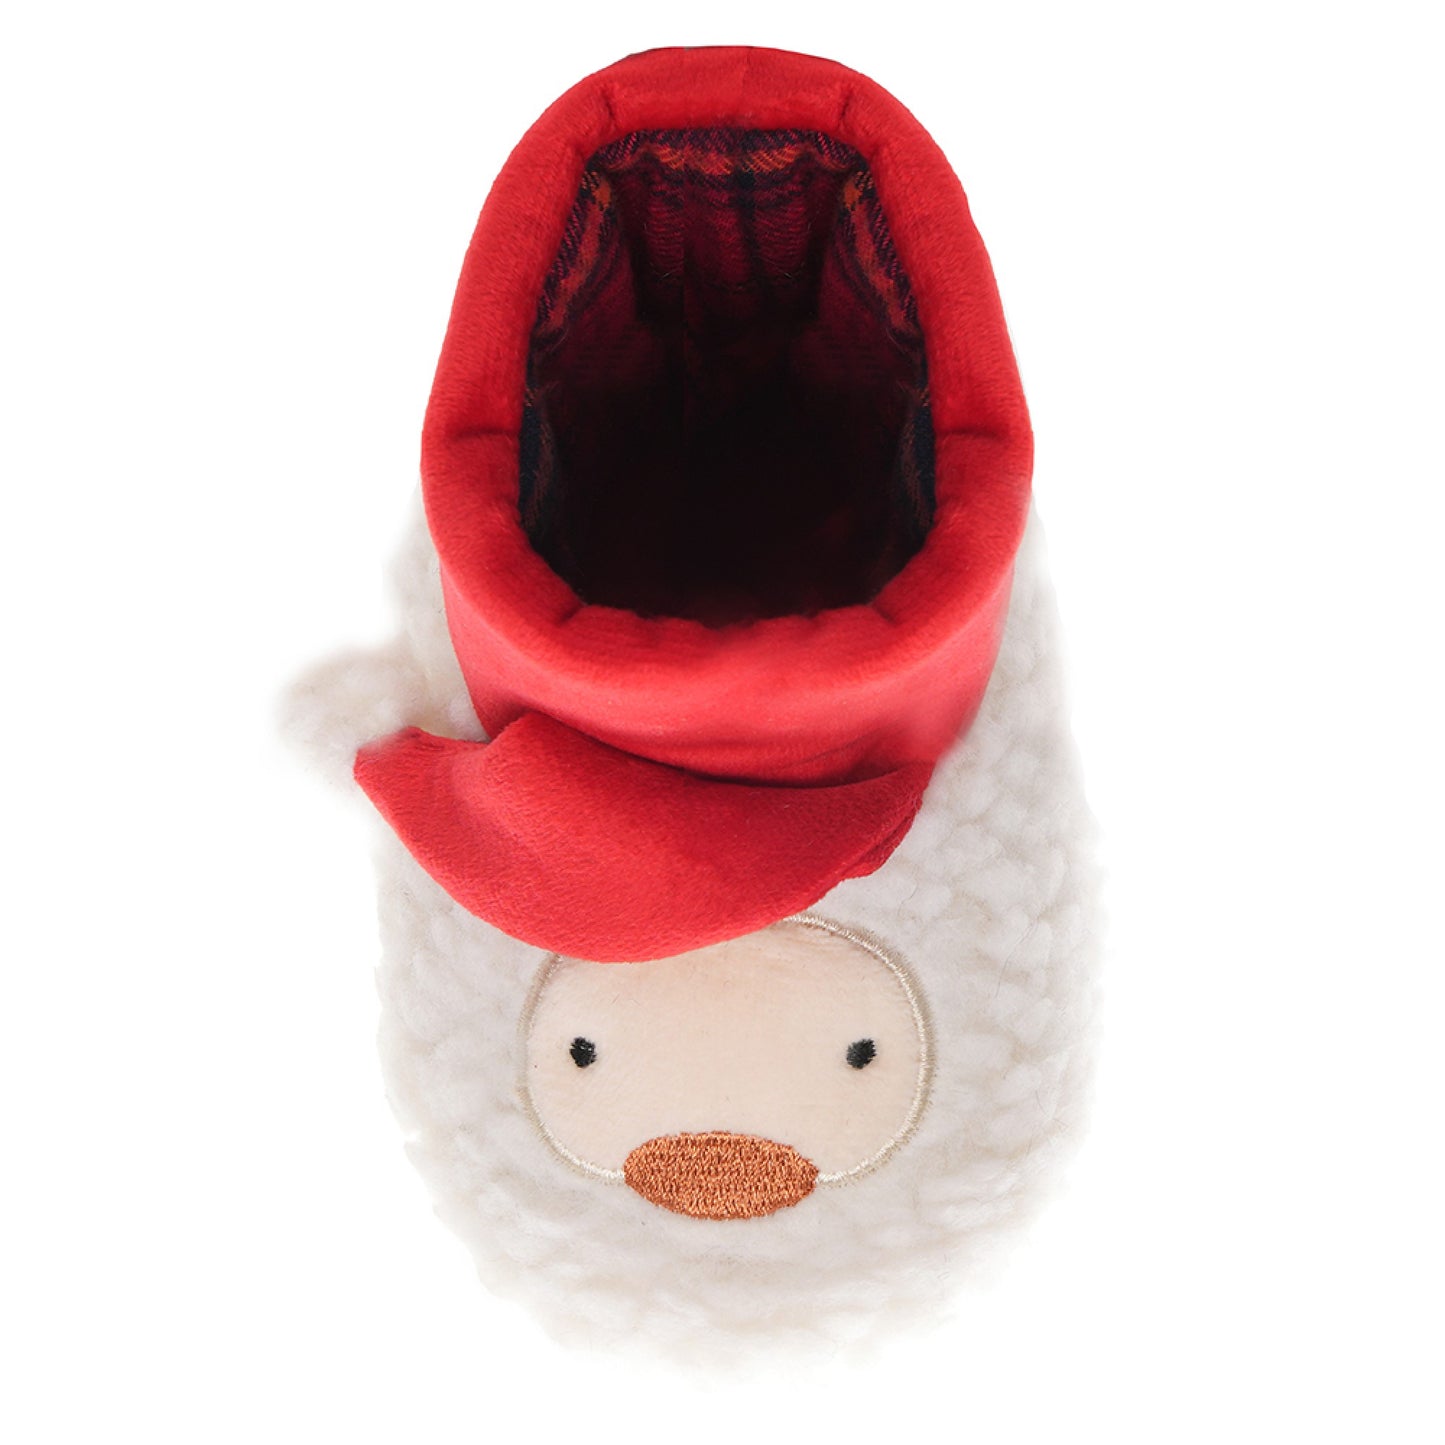 Baby Christmas Bootees Cream Faux Fur Red Velour Santa Slippers Pram Shoes